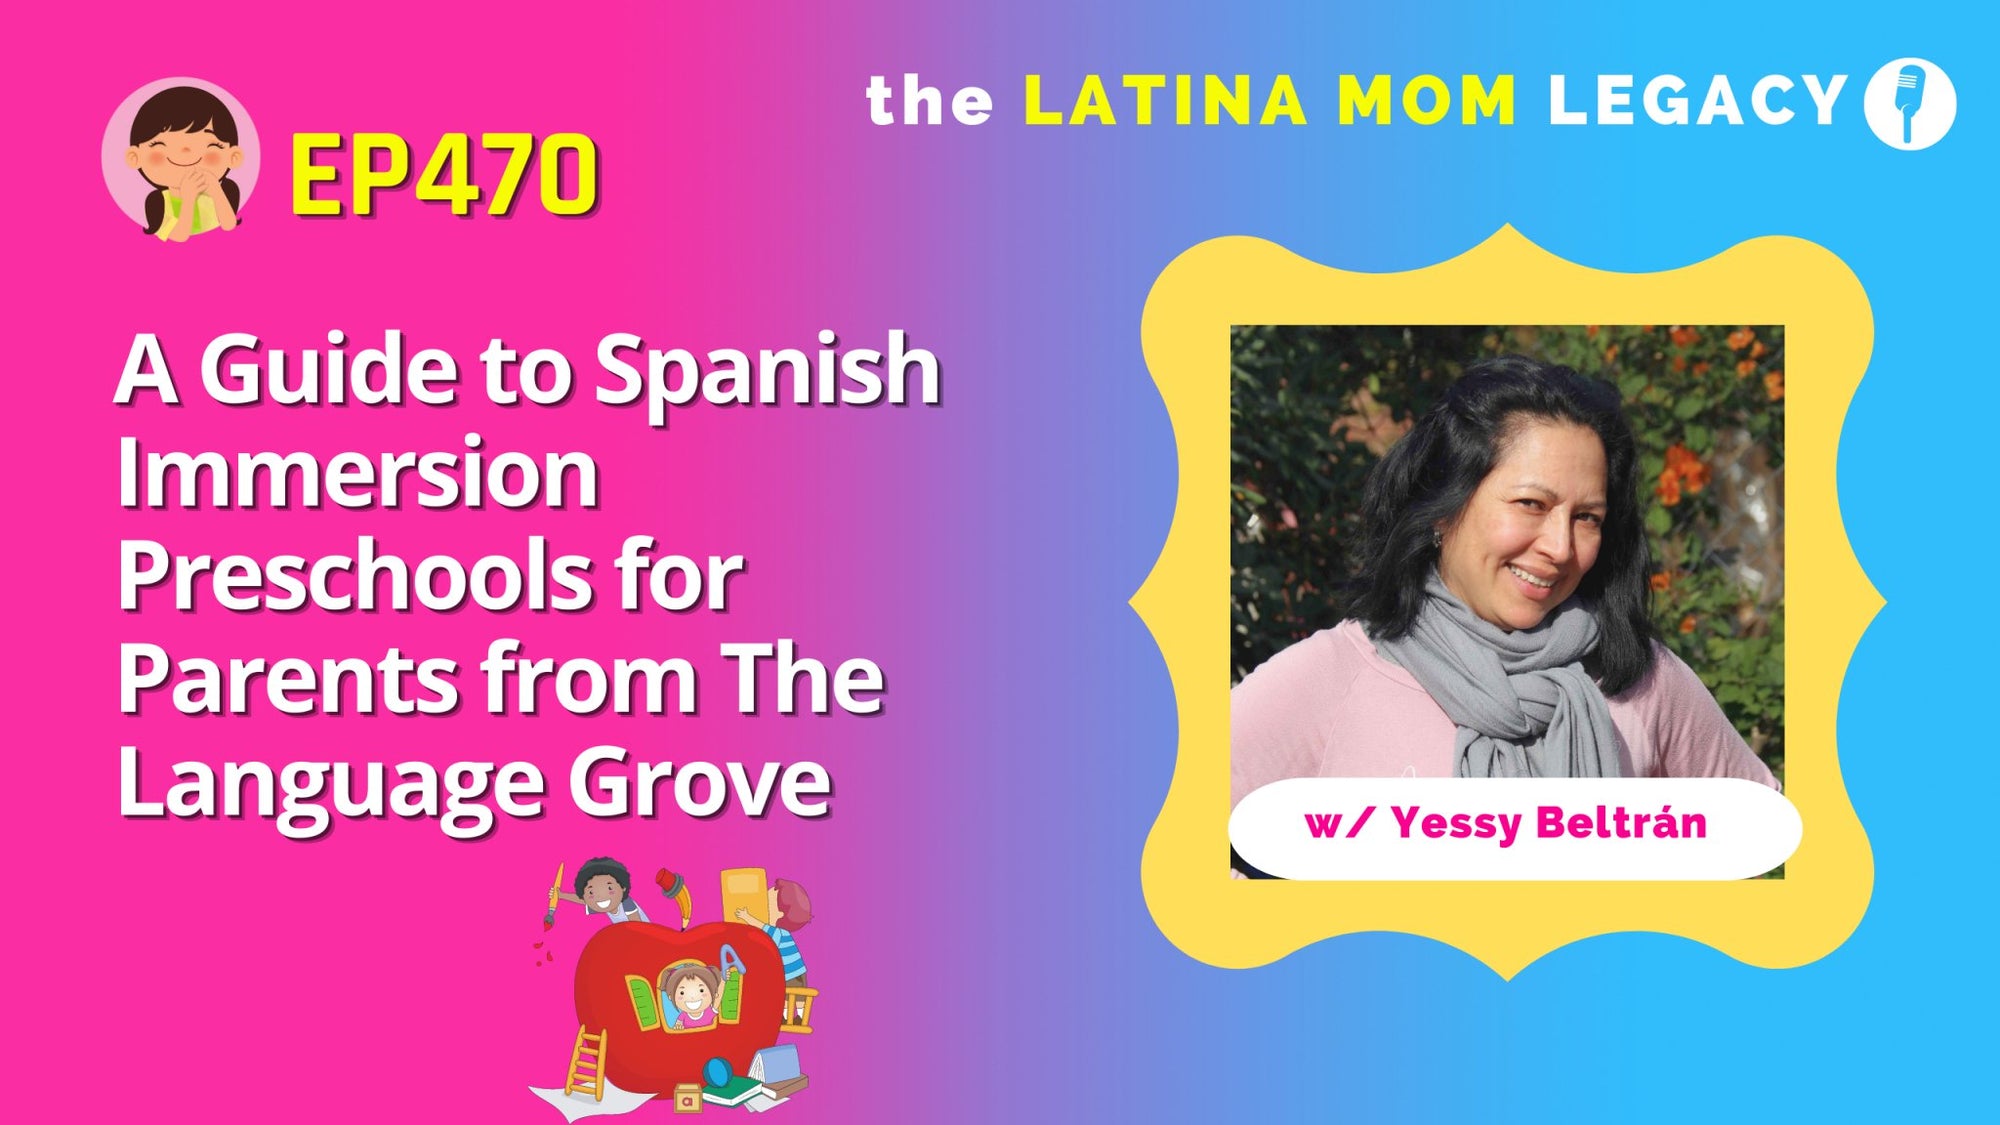 470 - Yessy Beltrán from The Language Grove: A Guide to Spanish Immersion Preschools for Parents - Mi LegaSi